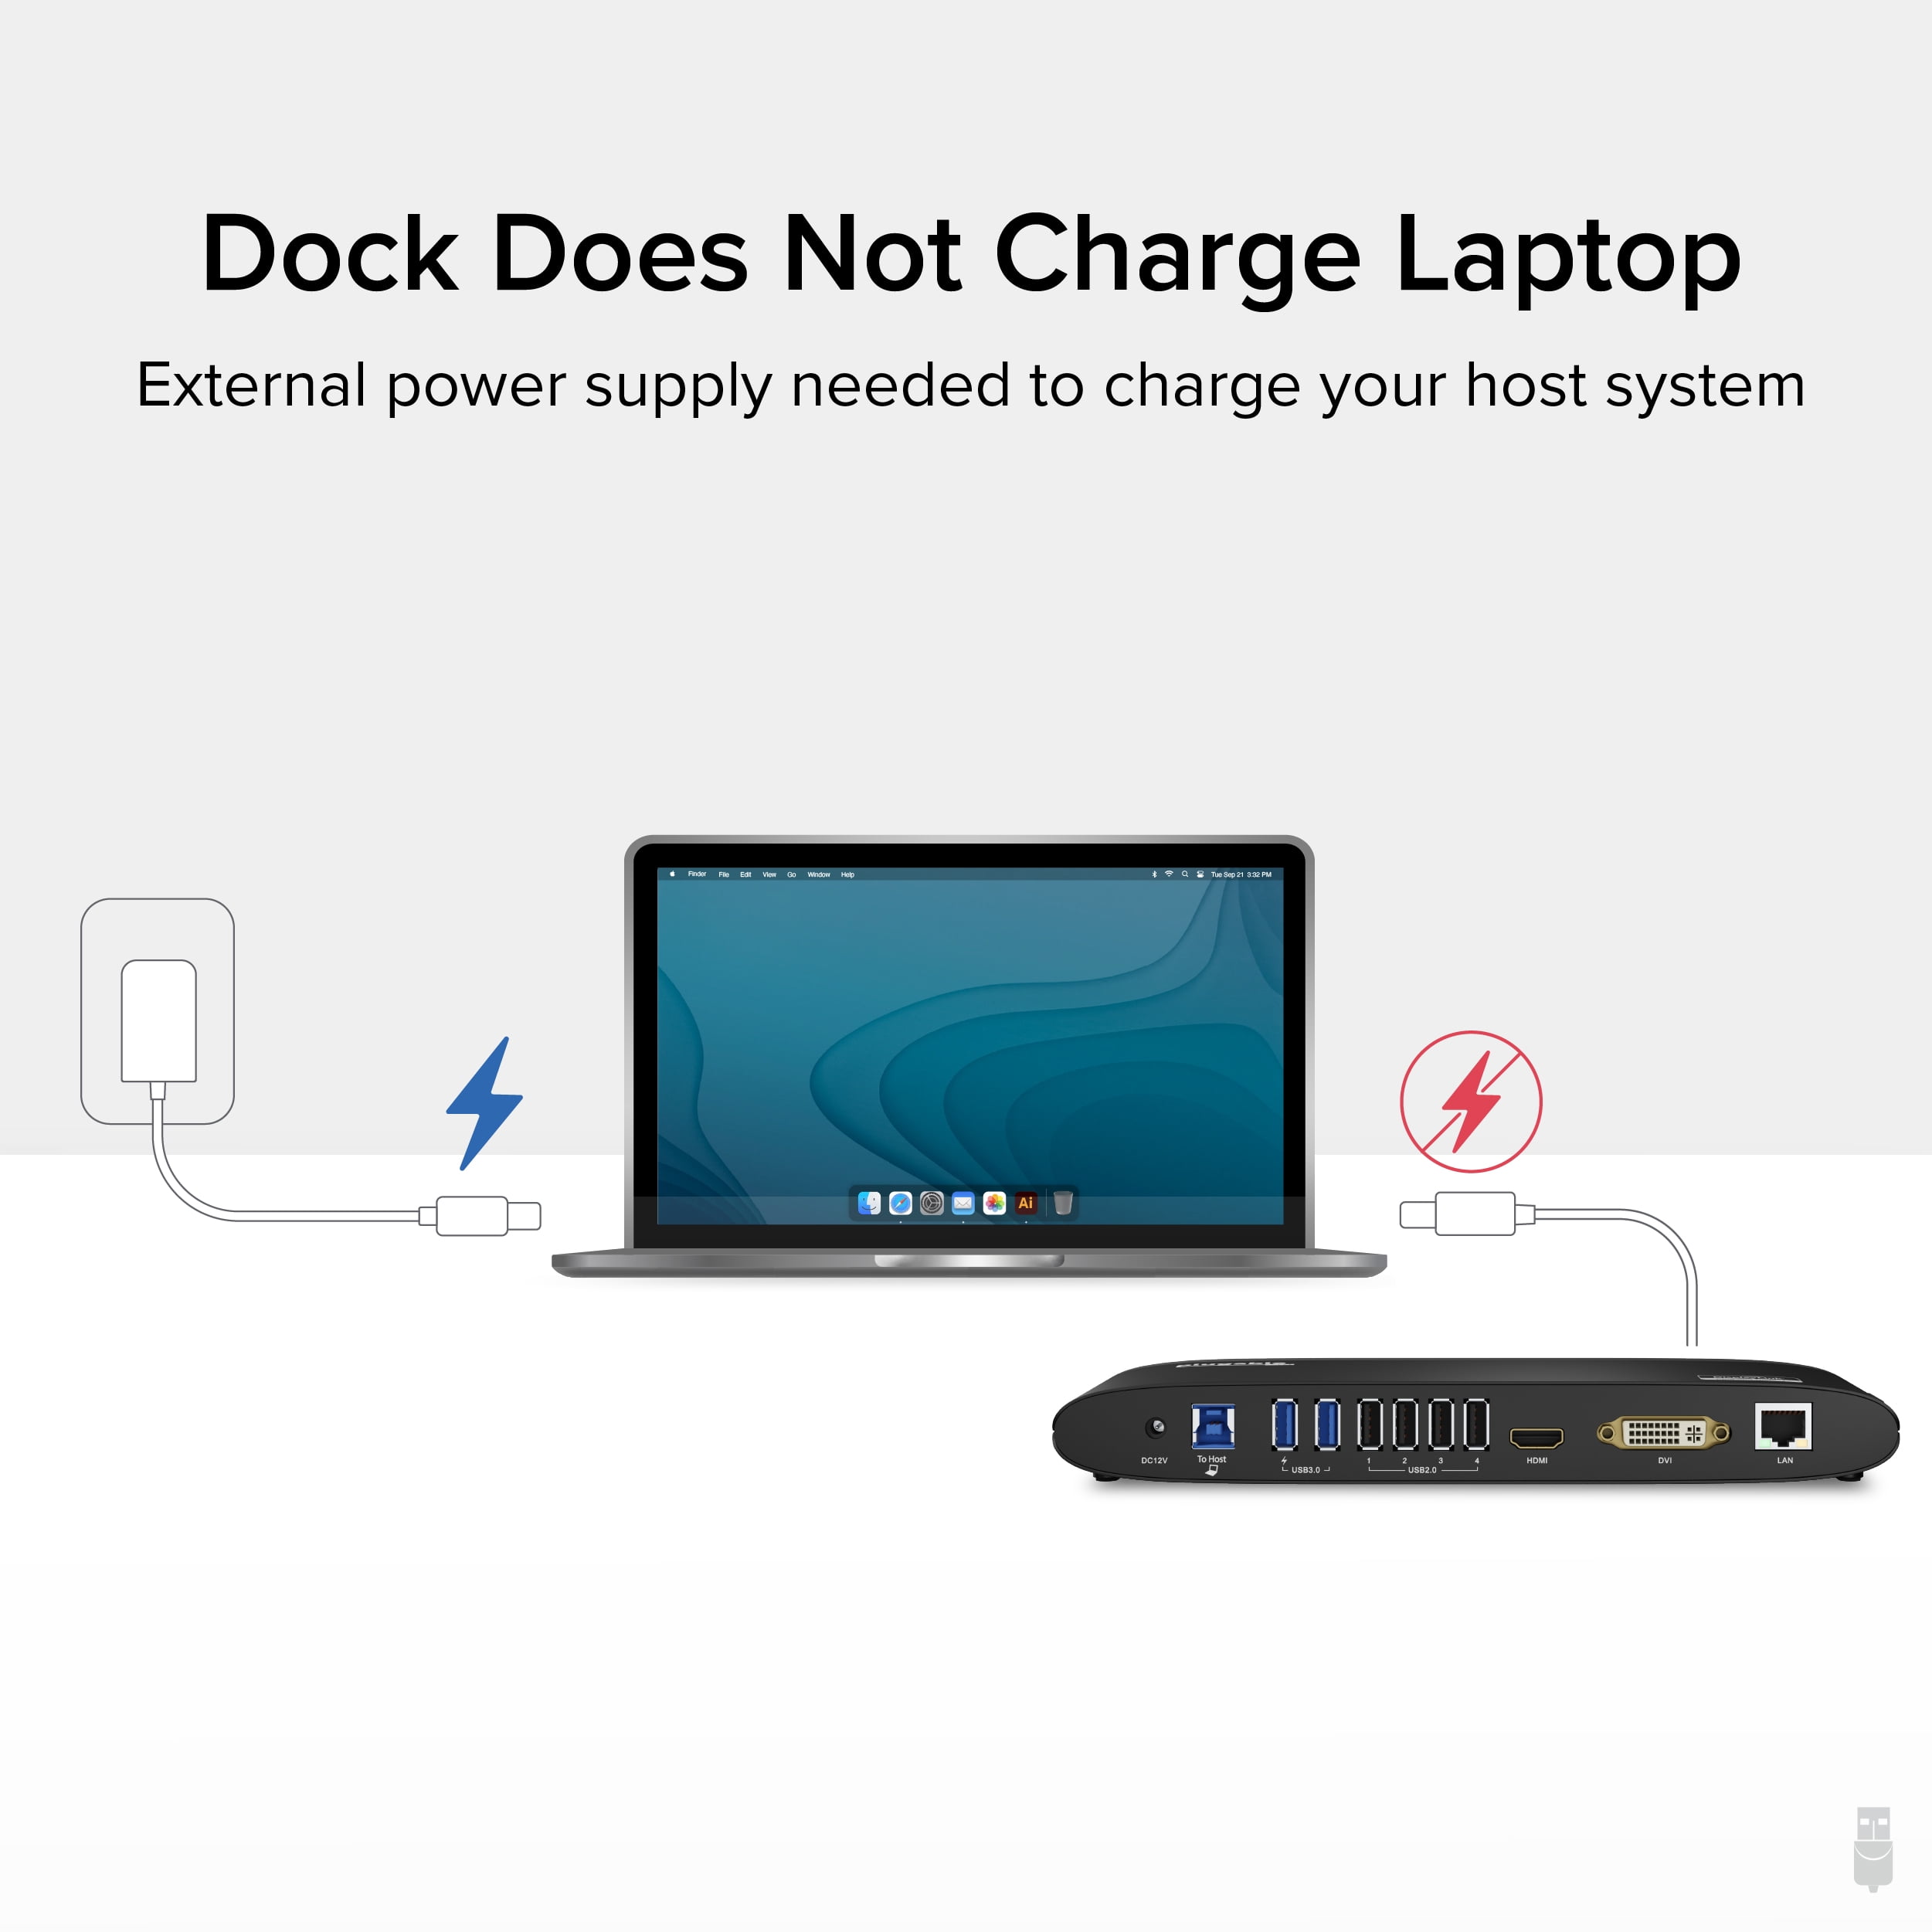  ICY BOX USB 3.0 Universal Laptop Docking Station for  Windows/Mac - Dual Monitor Dock (Dual HDMI, Gigabit Ethernet, Audio, 4 USB  Ports) with USB B to A/C Cable : Electronics